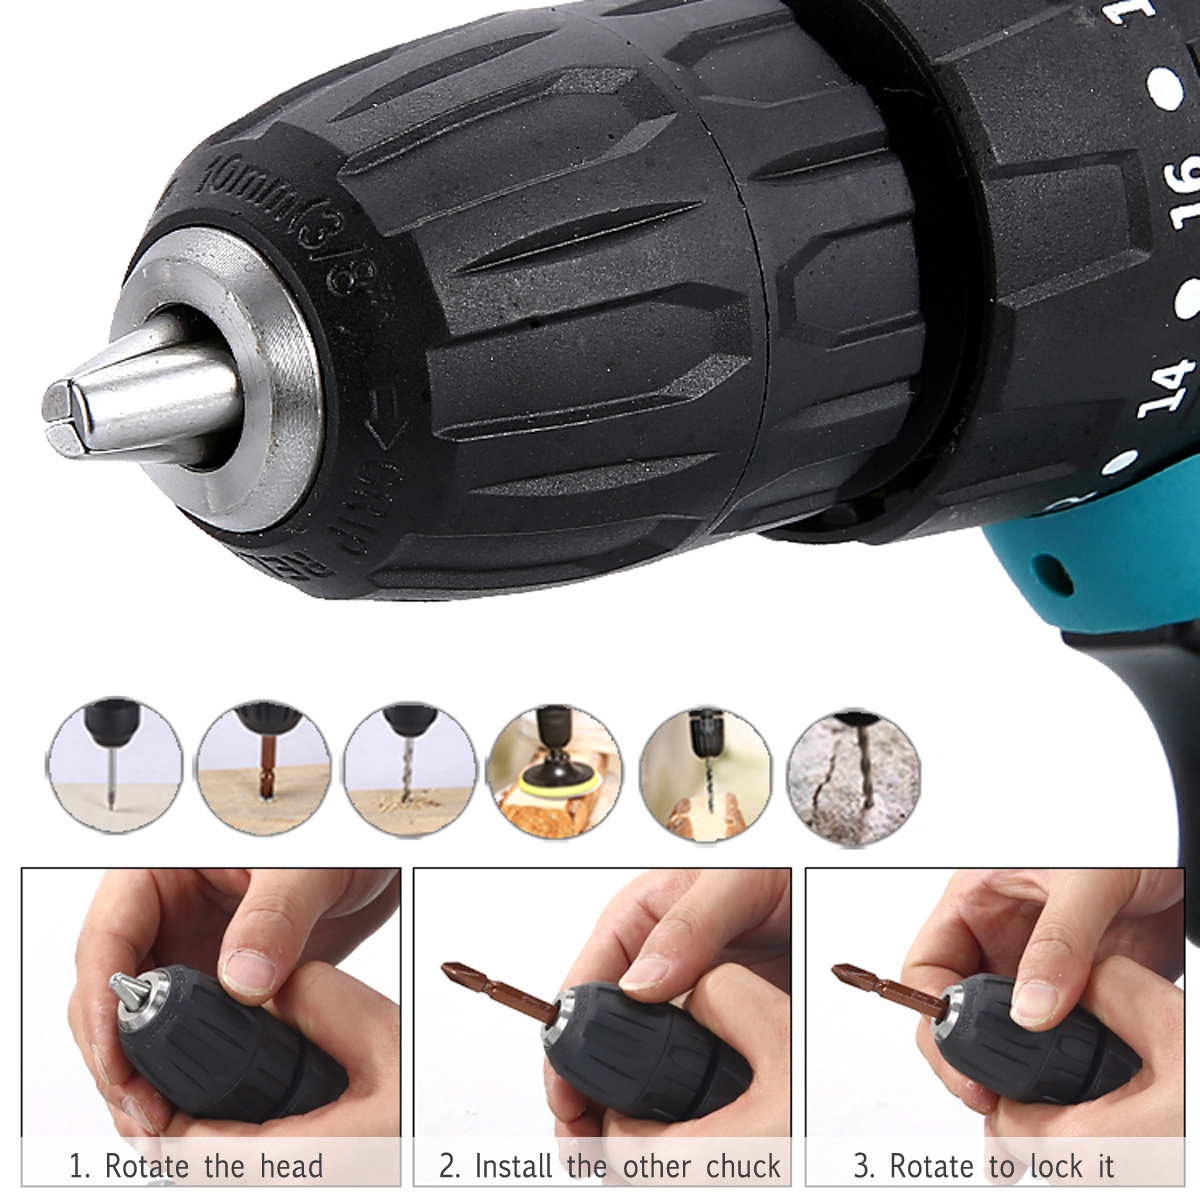 12V-Cordless-Electric-Impact-Drill-Multi-function-Hand-Hammer-Screwdriver-Lithium-Battery-Rechargabl-1452371-5